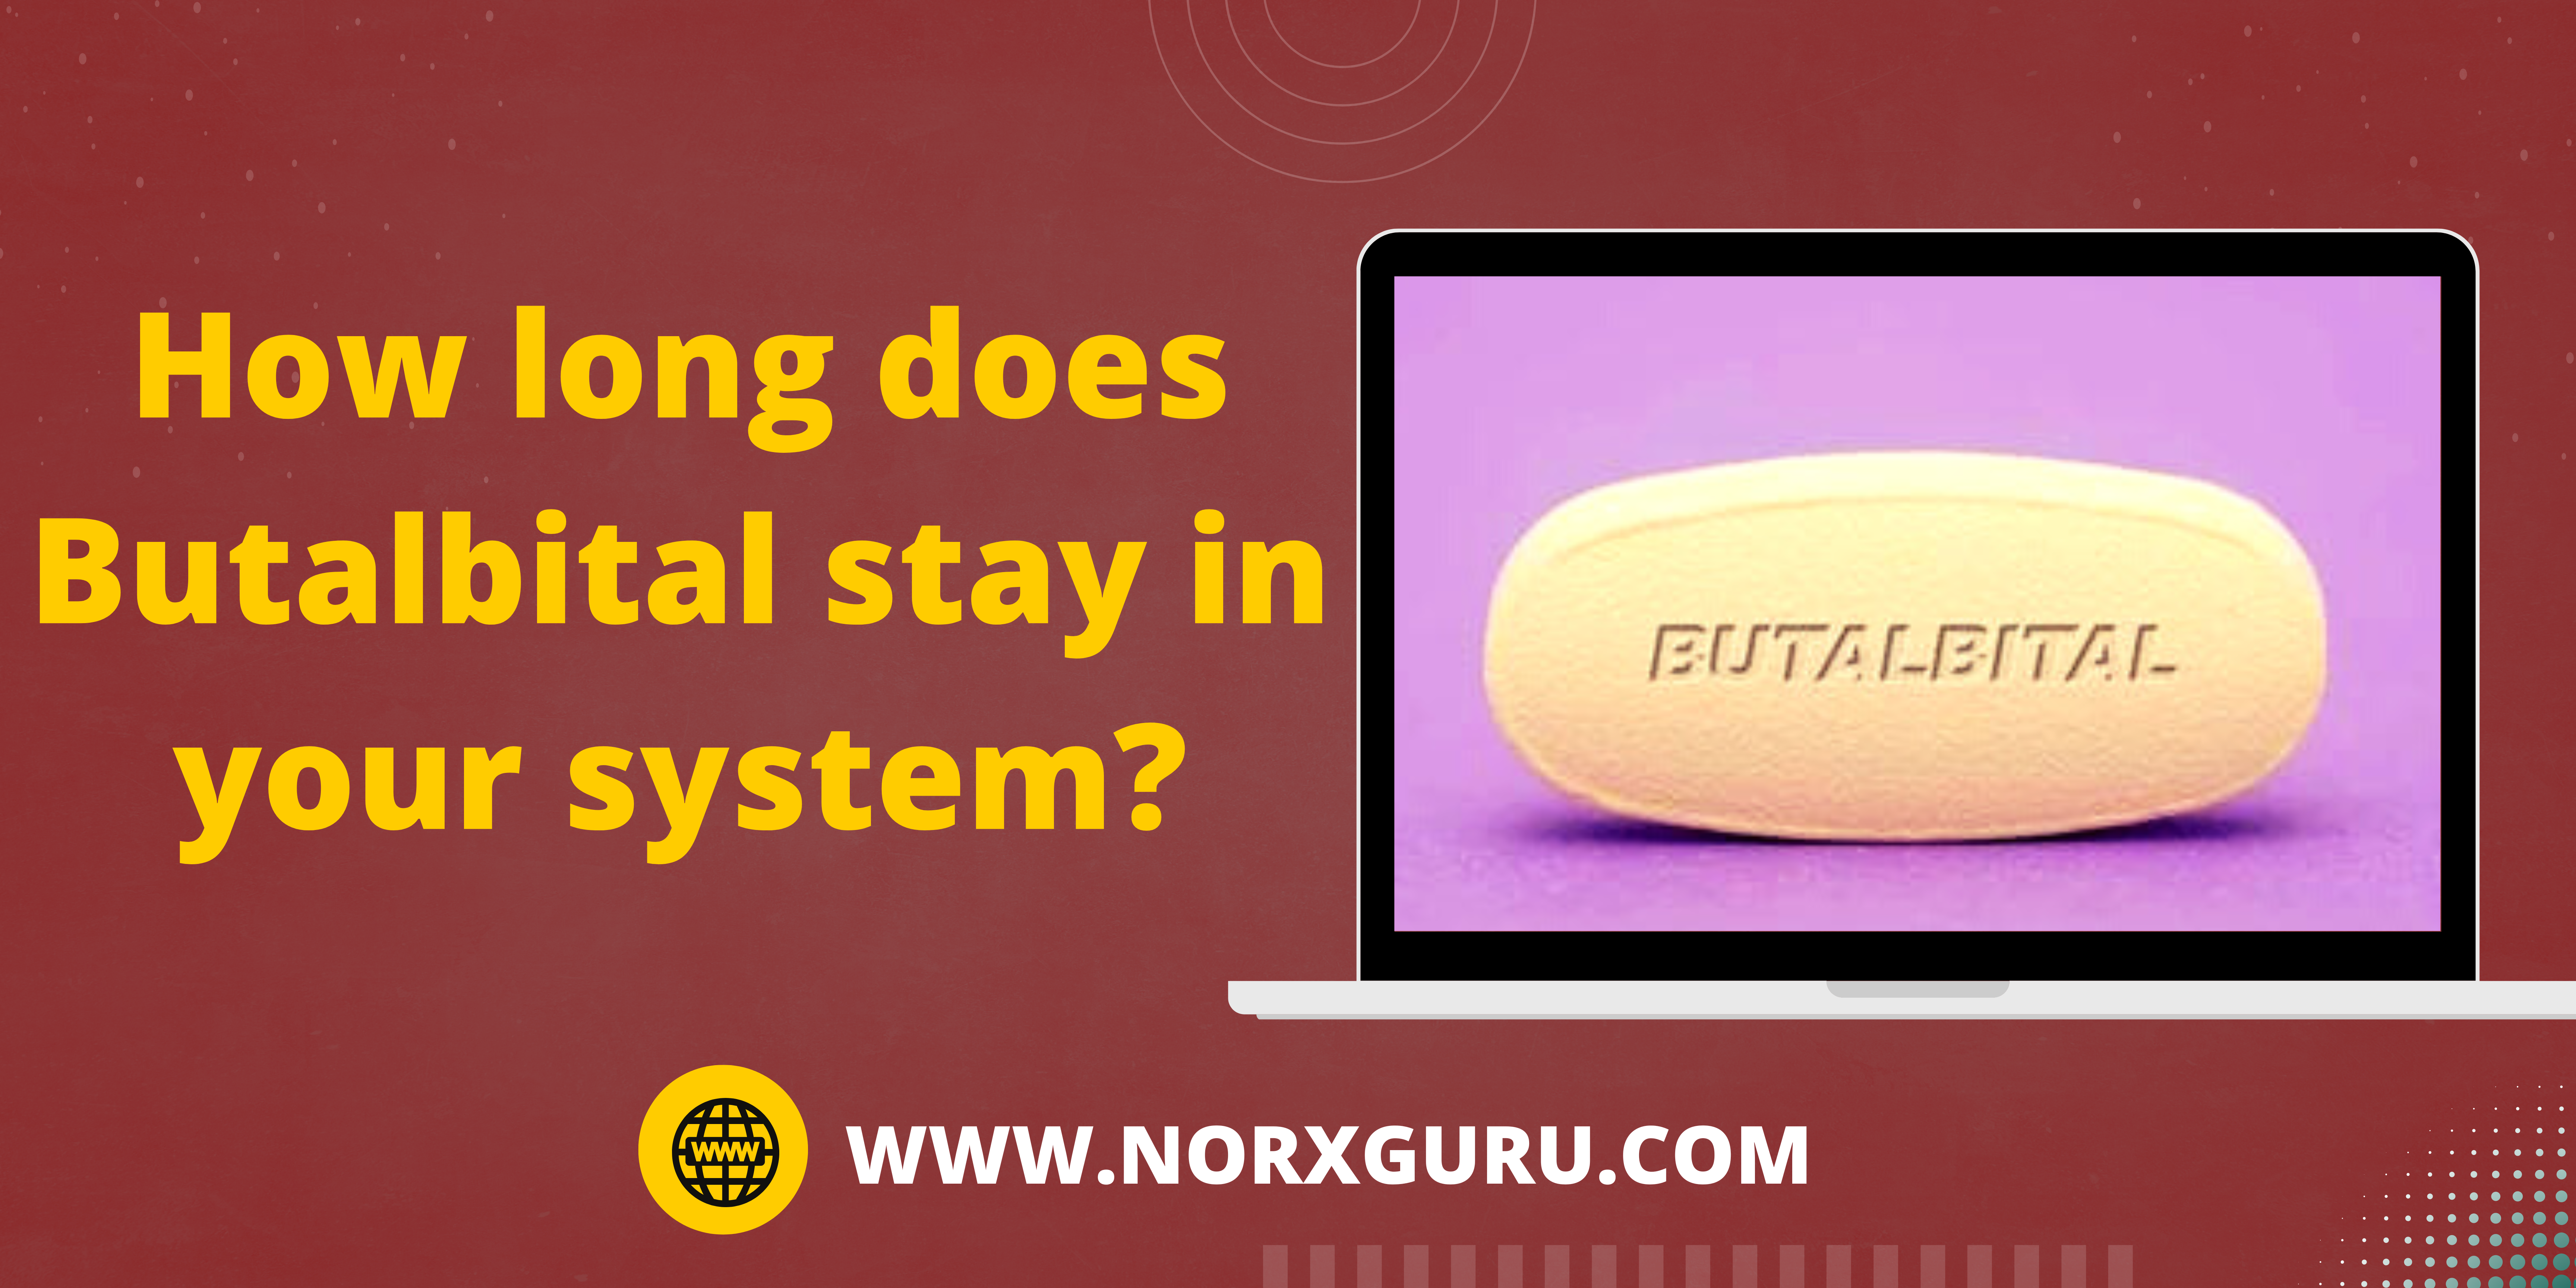 How long does Butalbital stay in your system?